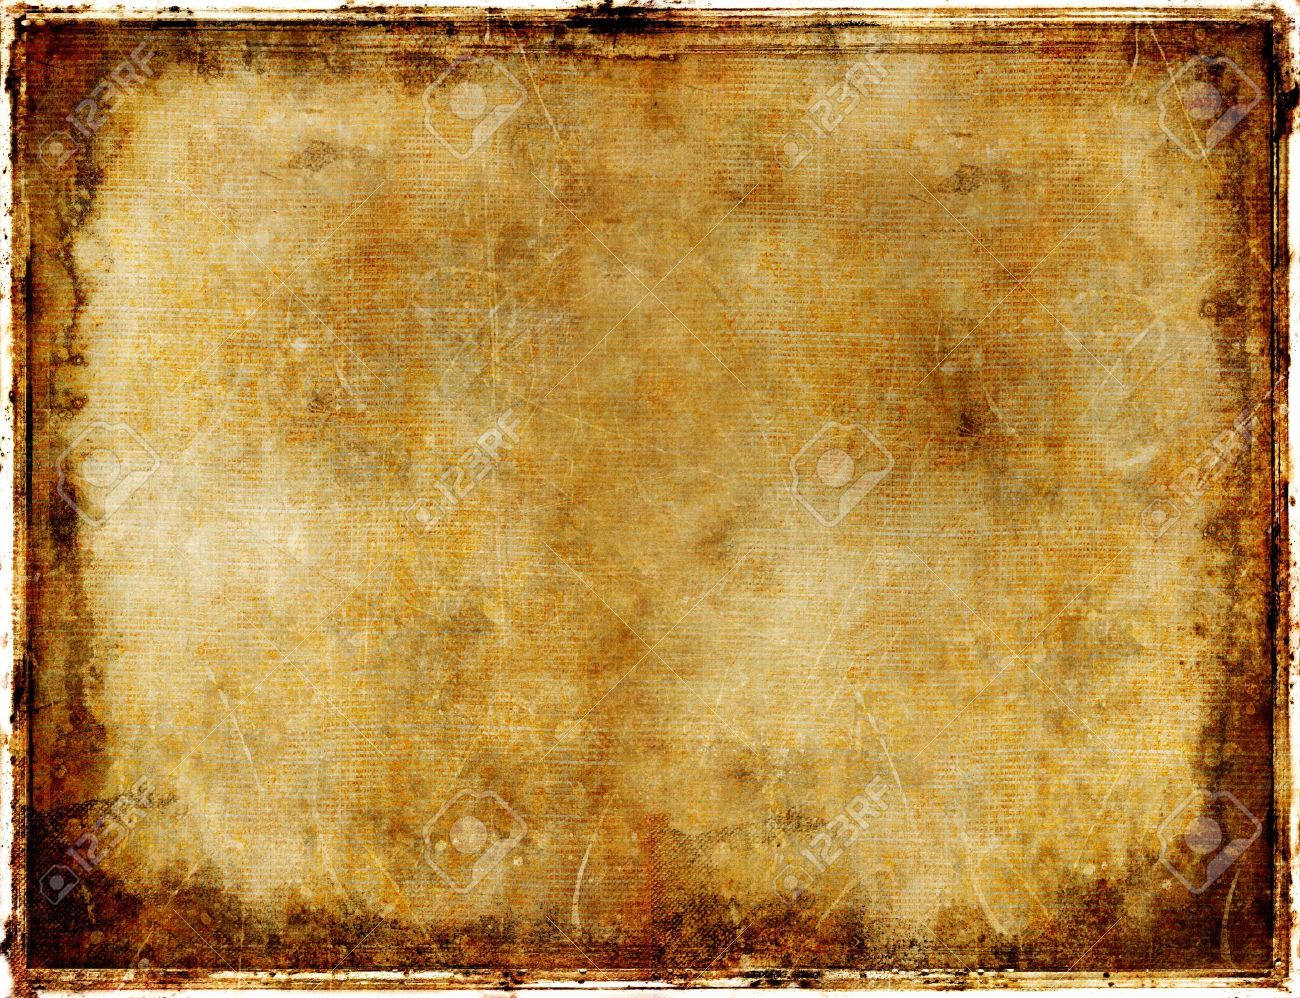 Ancient Paper Background Stock Photo Picture And Royalty